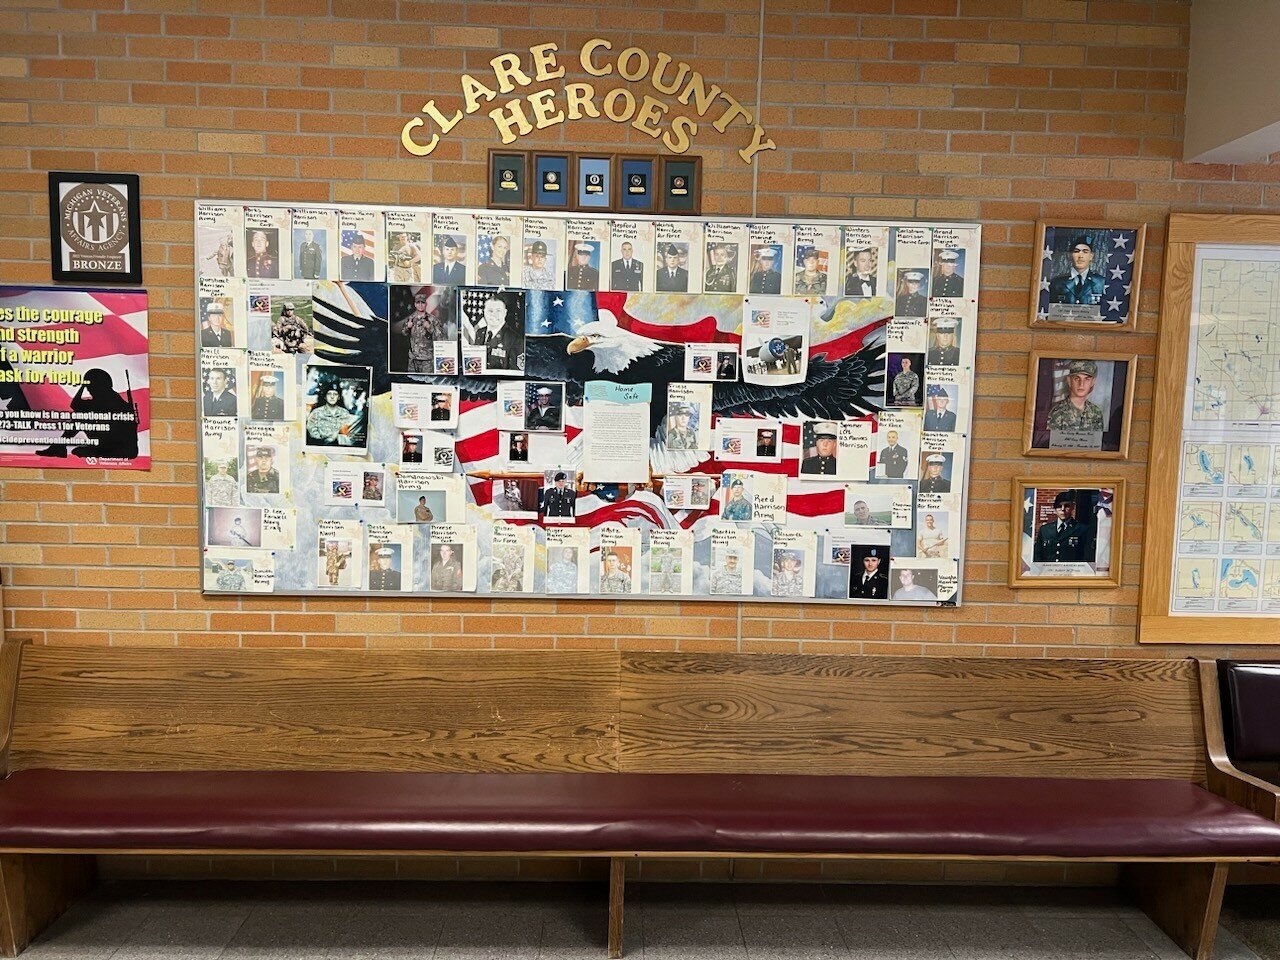 Several of the components of the original Honor Wall, shown here, were relocated to create space for the new photo installations, In Memoriam and POW/MIA Table.